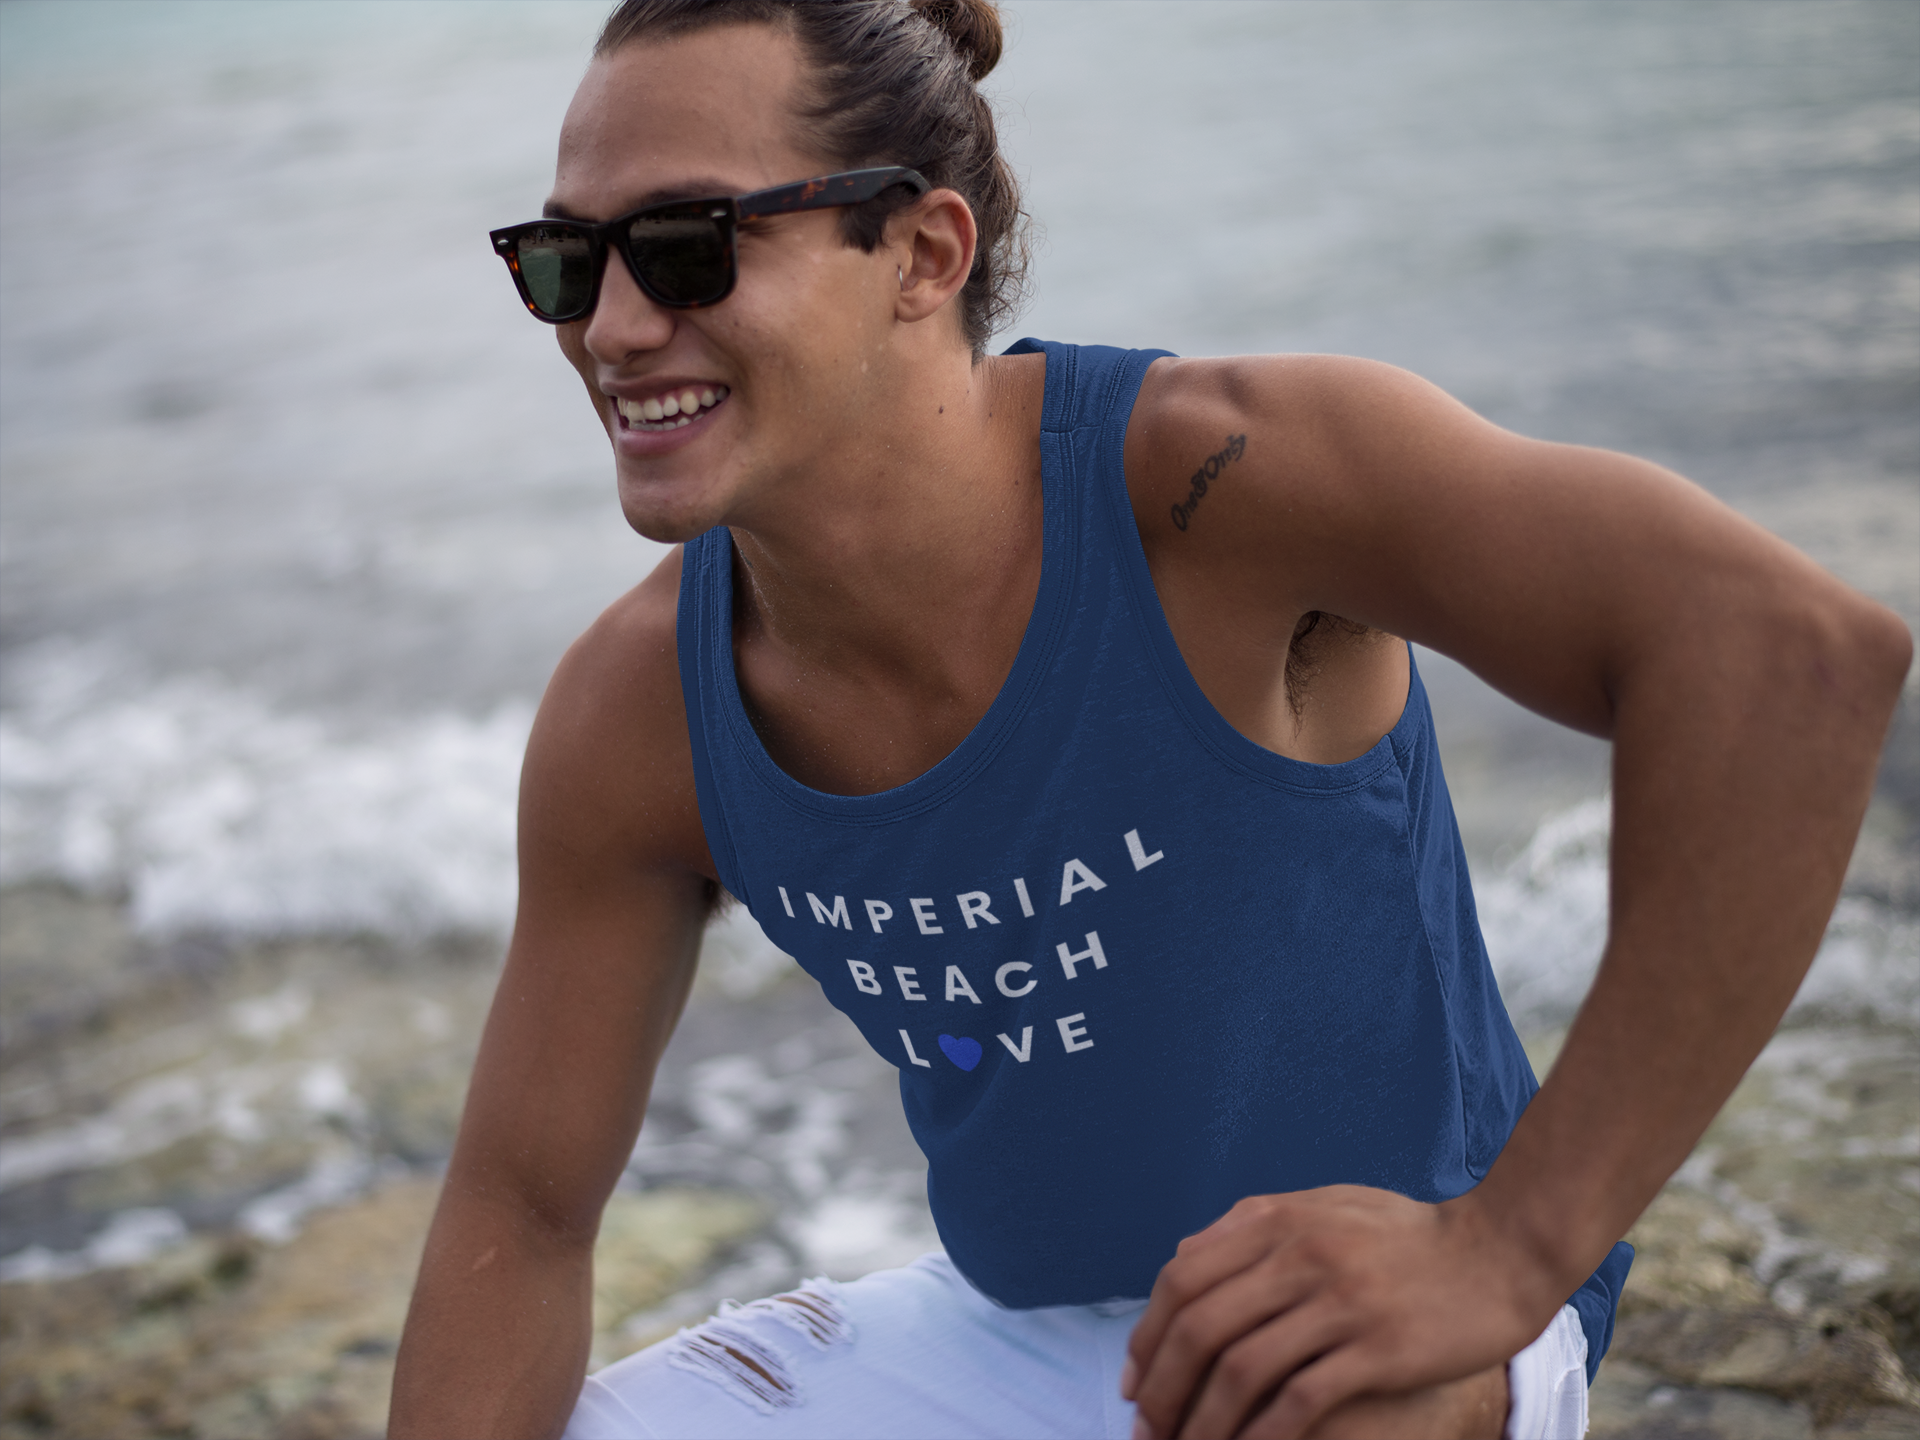 Young man with man-bun wearing sunglasses and Imperial Beach tank top kneeling down in front of ocean waves.